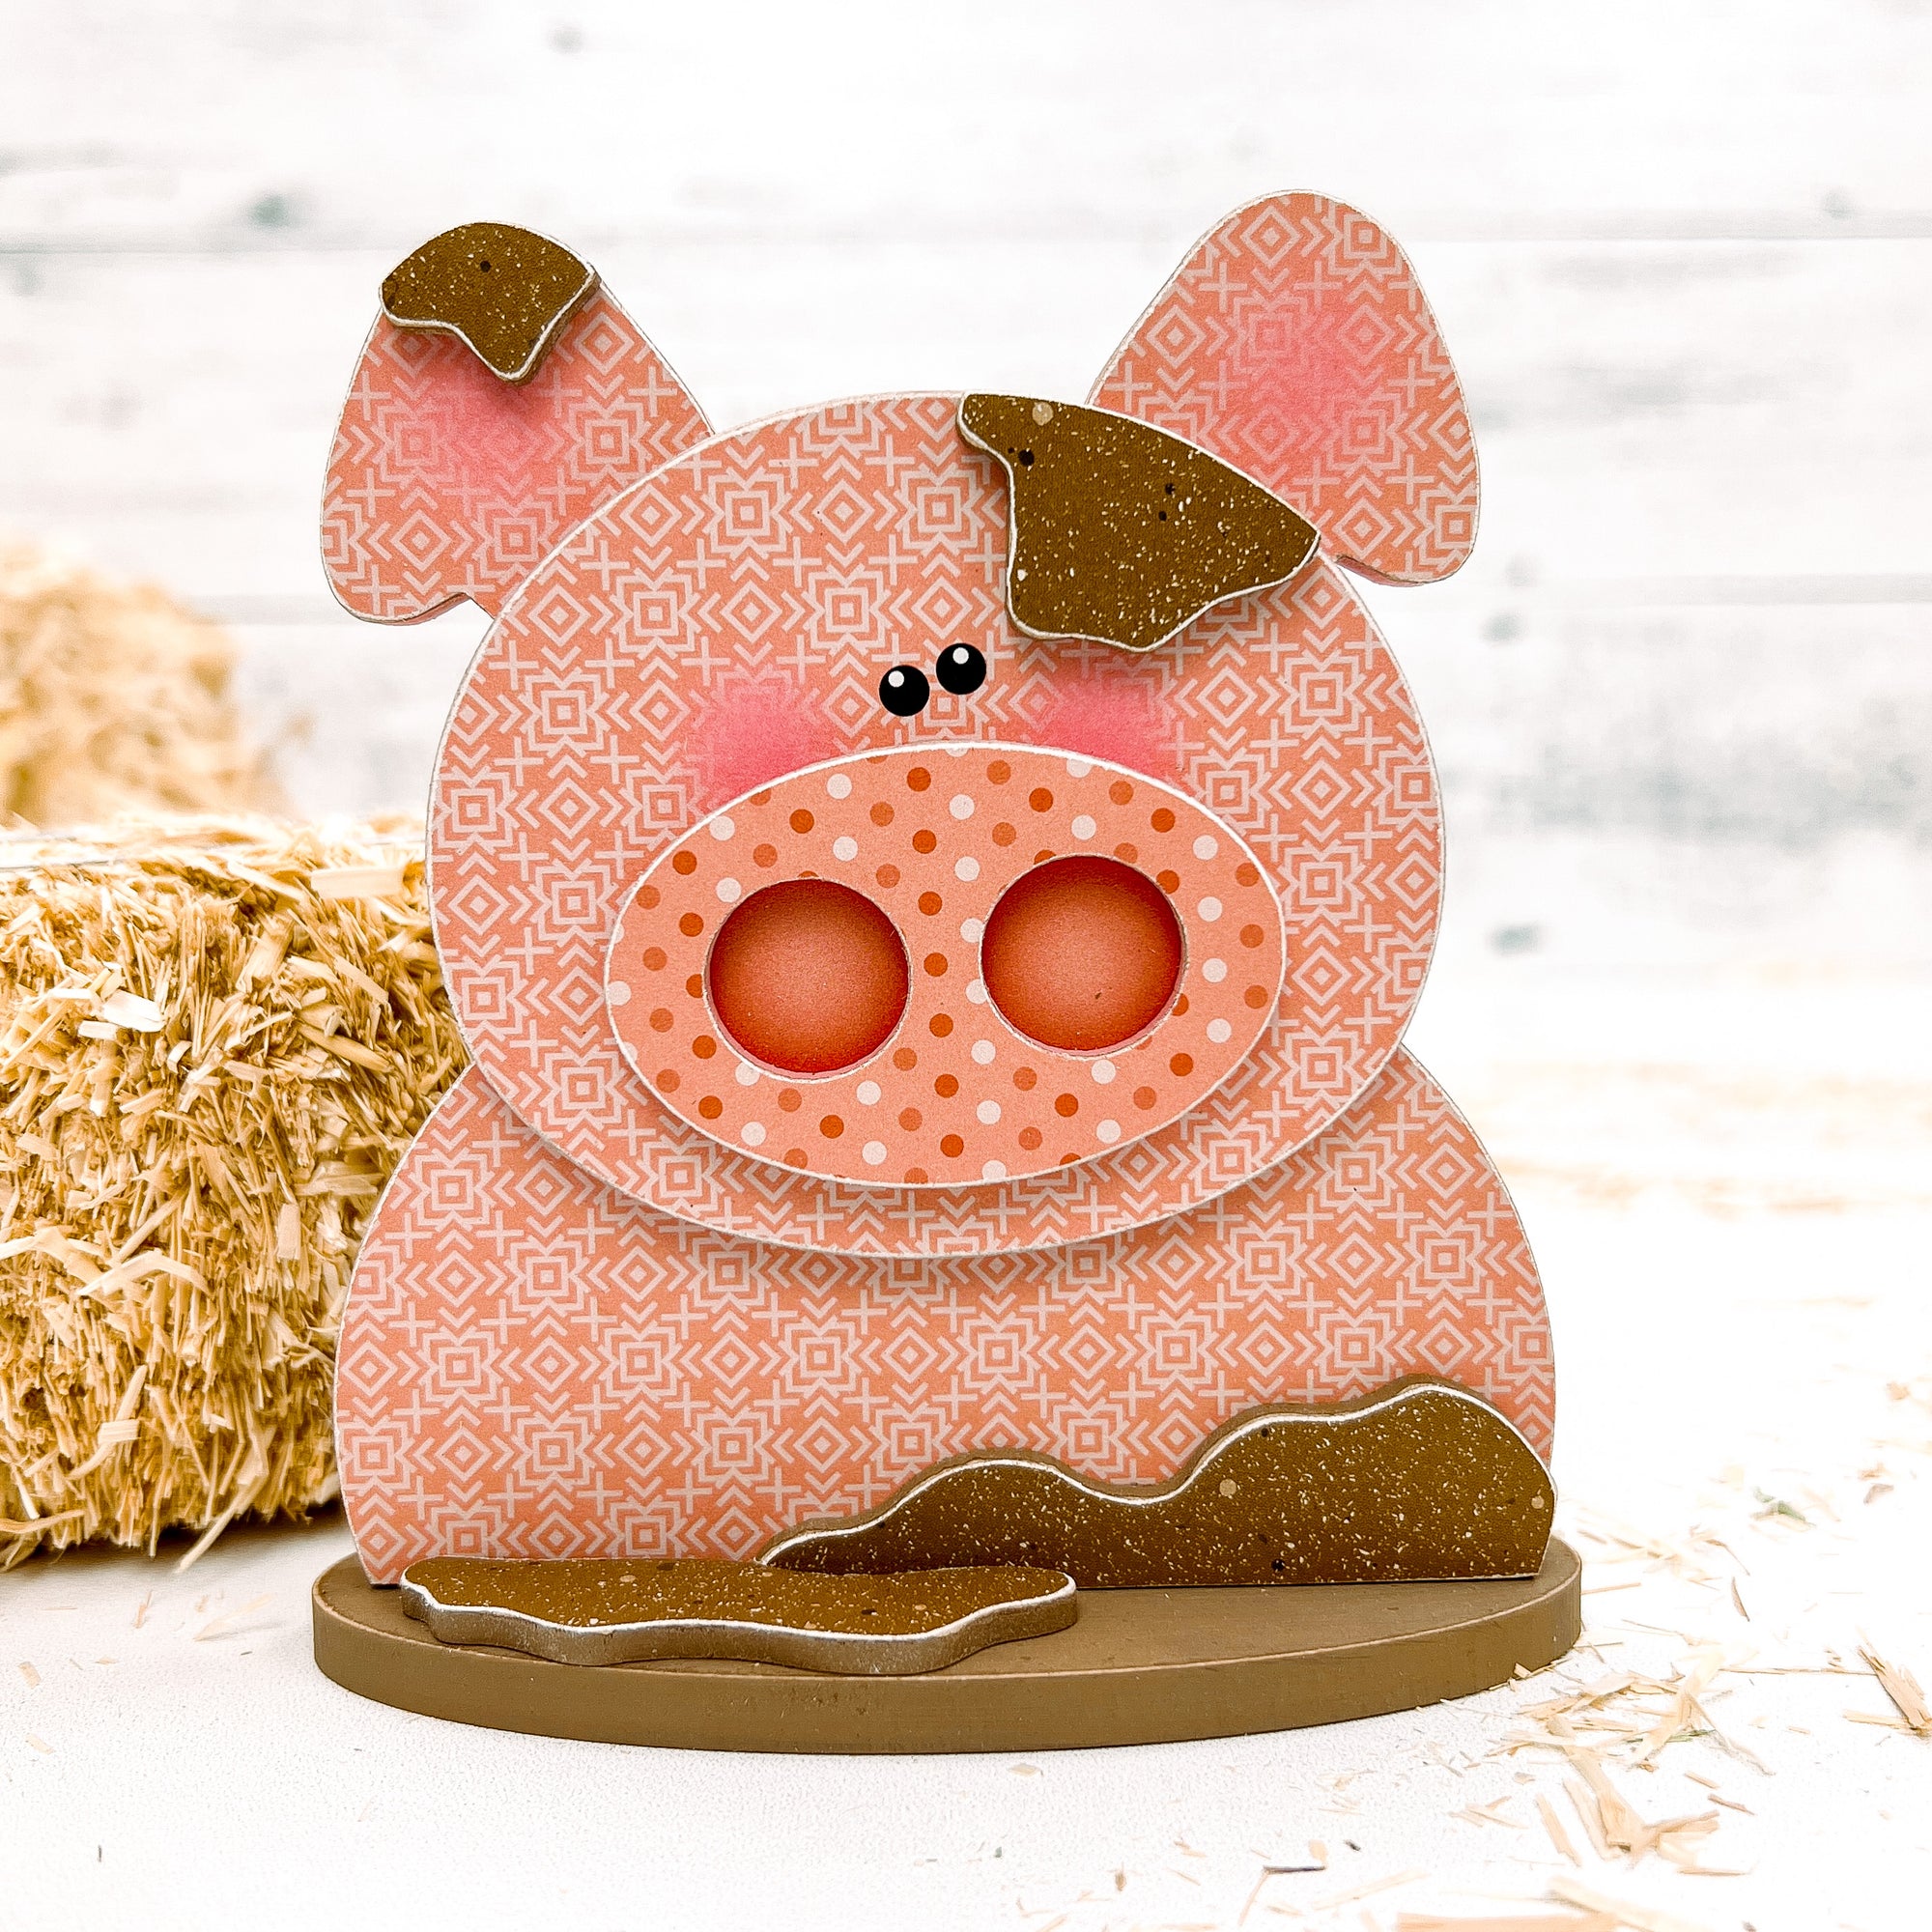 Muddy pig wood decor craft kit for styling tiered trays, mantles, shelves, and table tops. Fall on the farm seasonal wood decorations. 